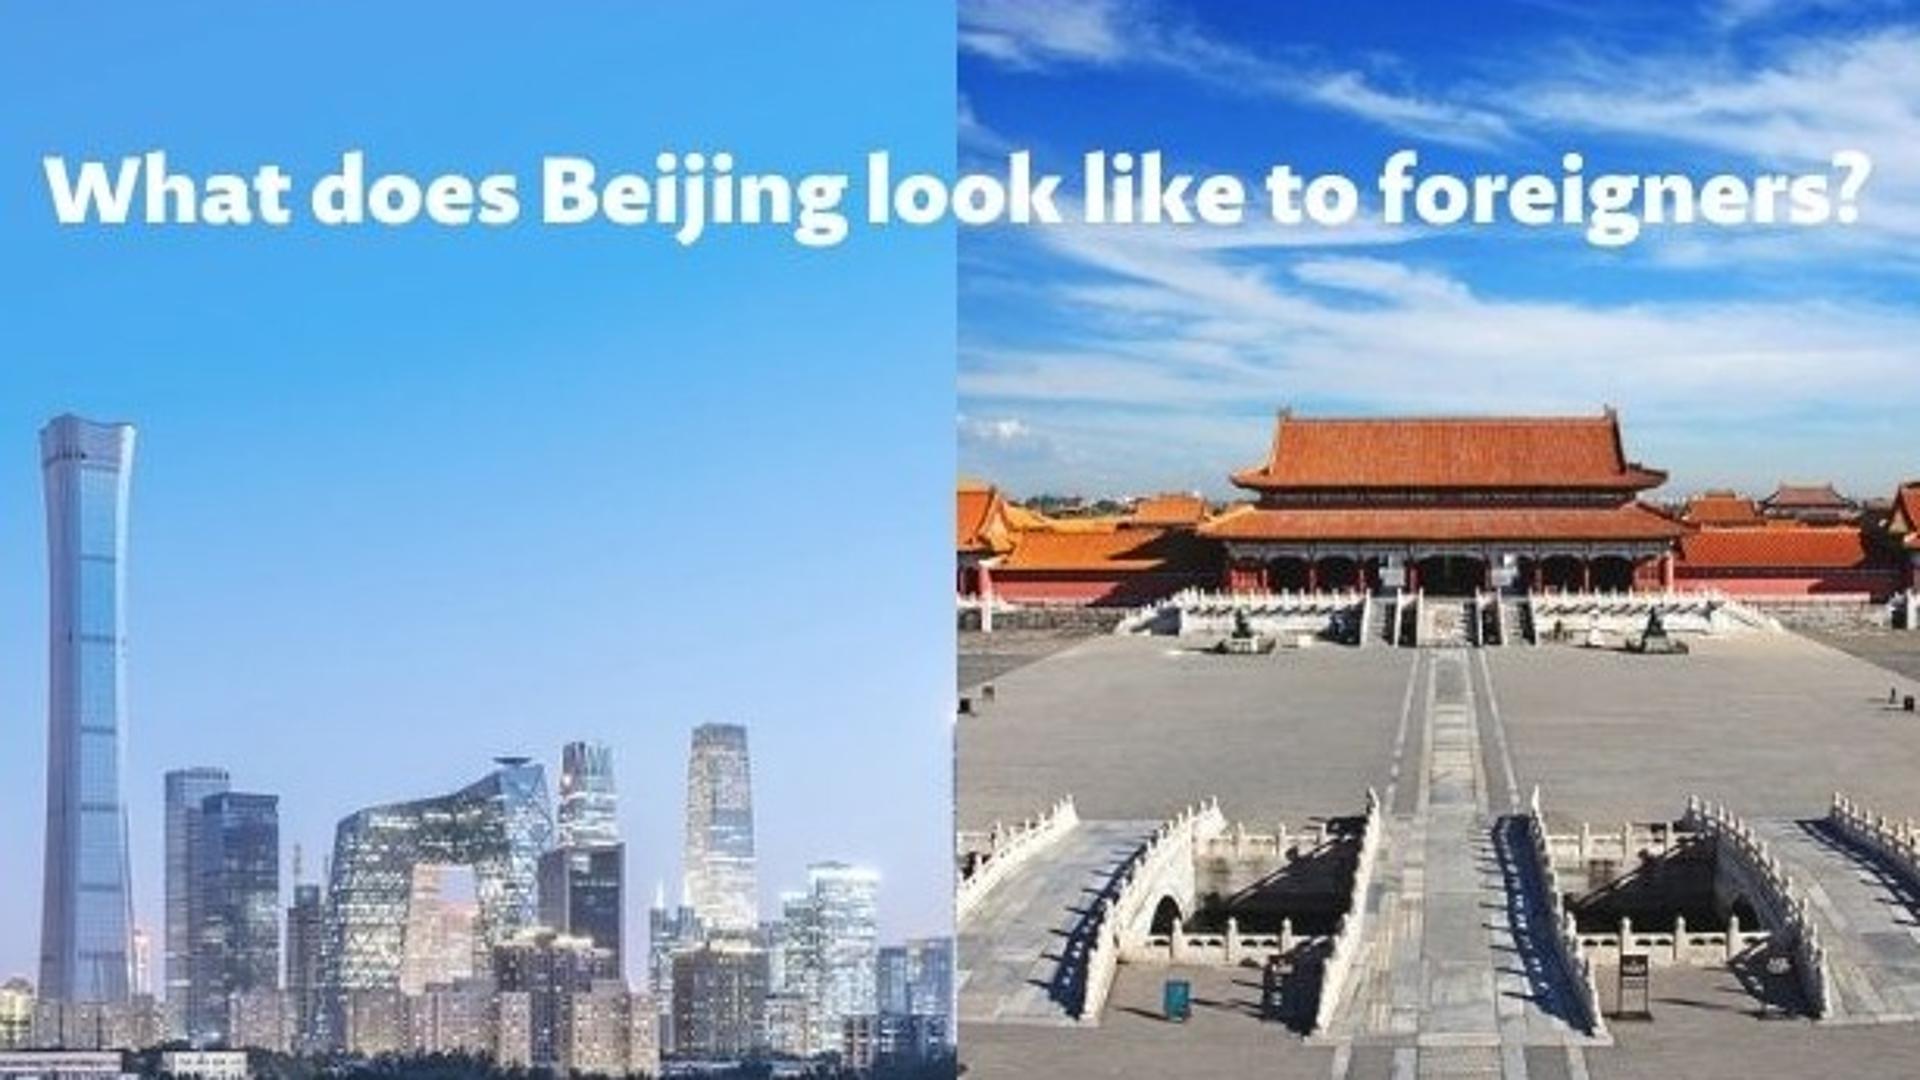 What does Beijing look like to foreigners?